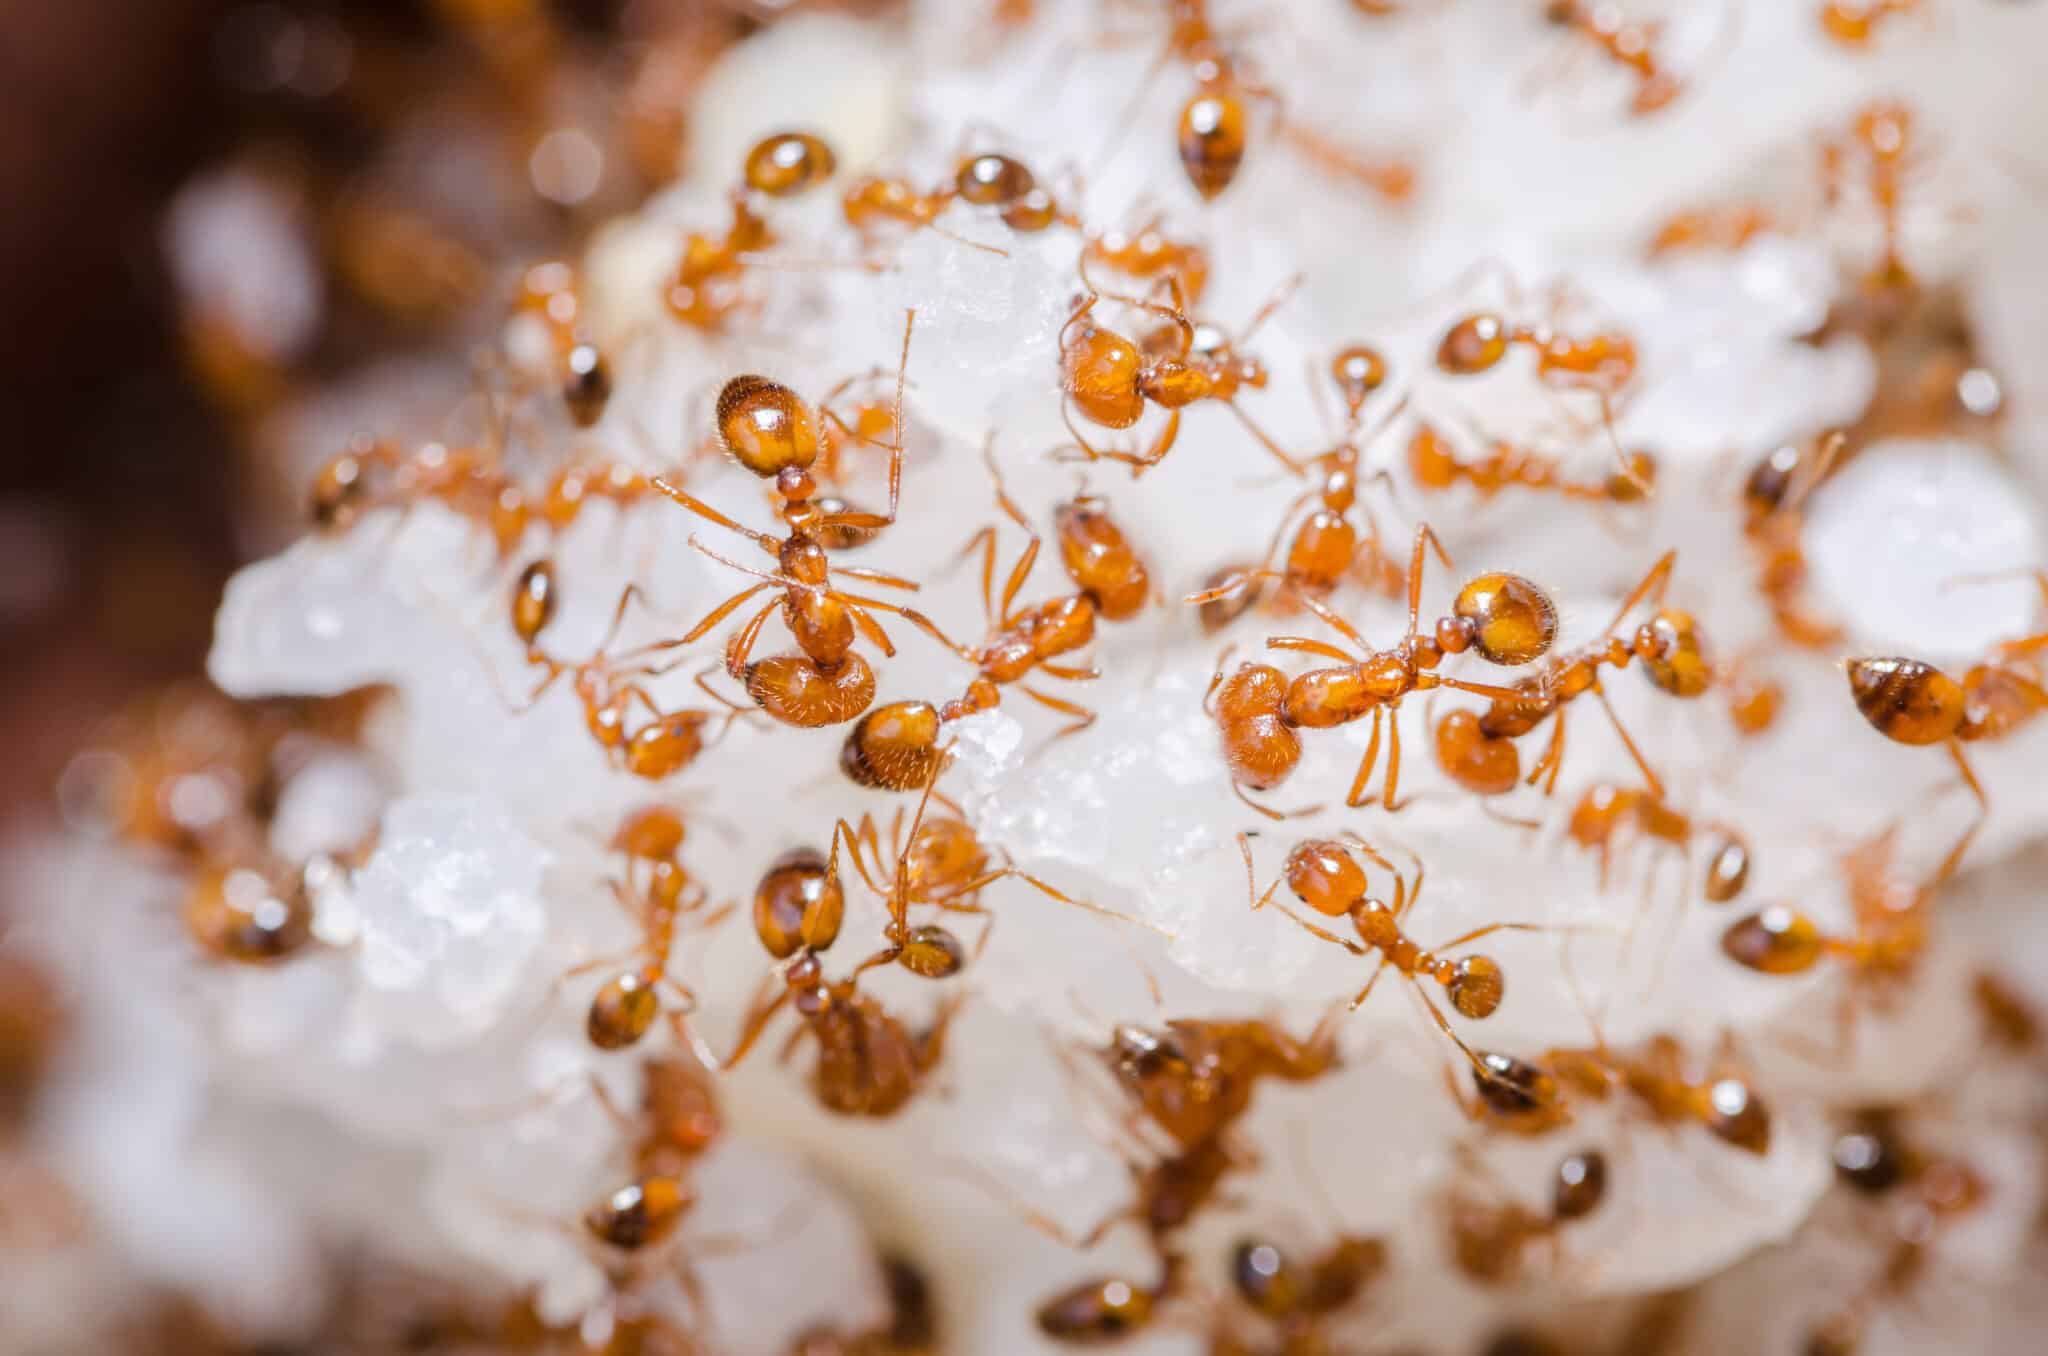 Red fire ants on a Grain of white Rice.